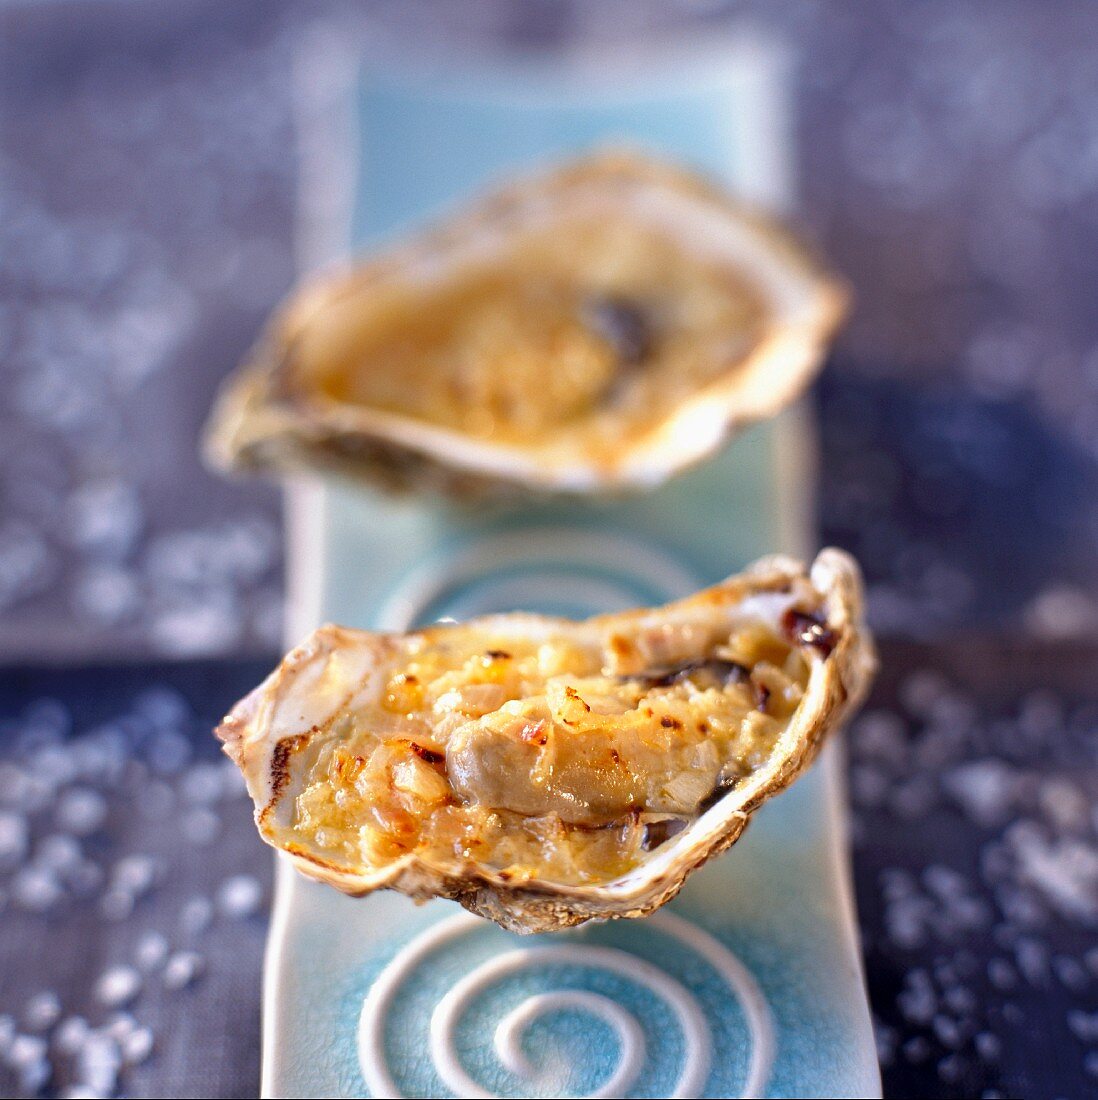 Hot oysters with shallots and red wine